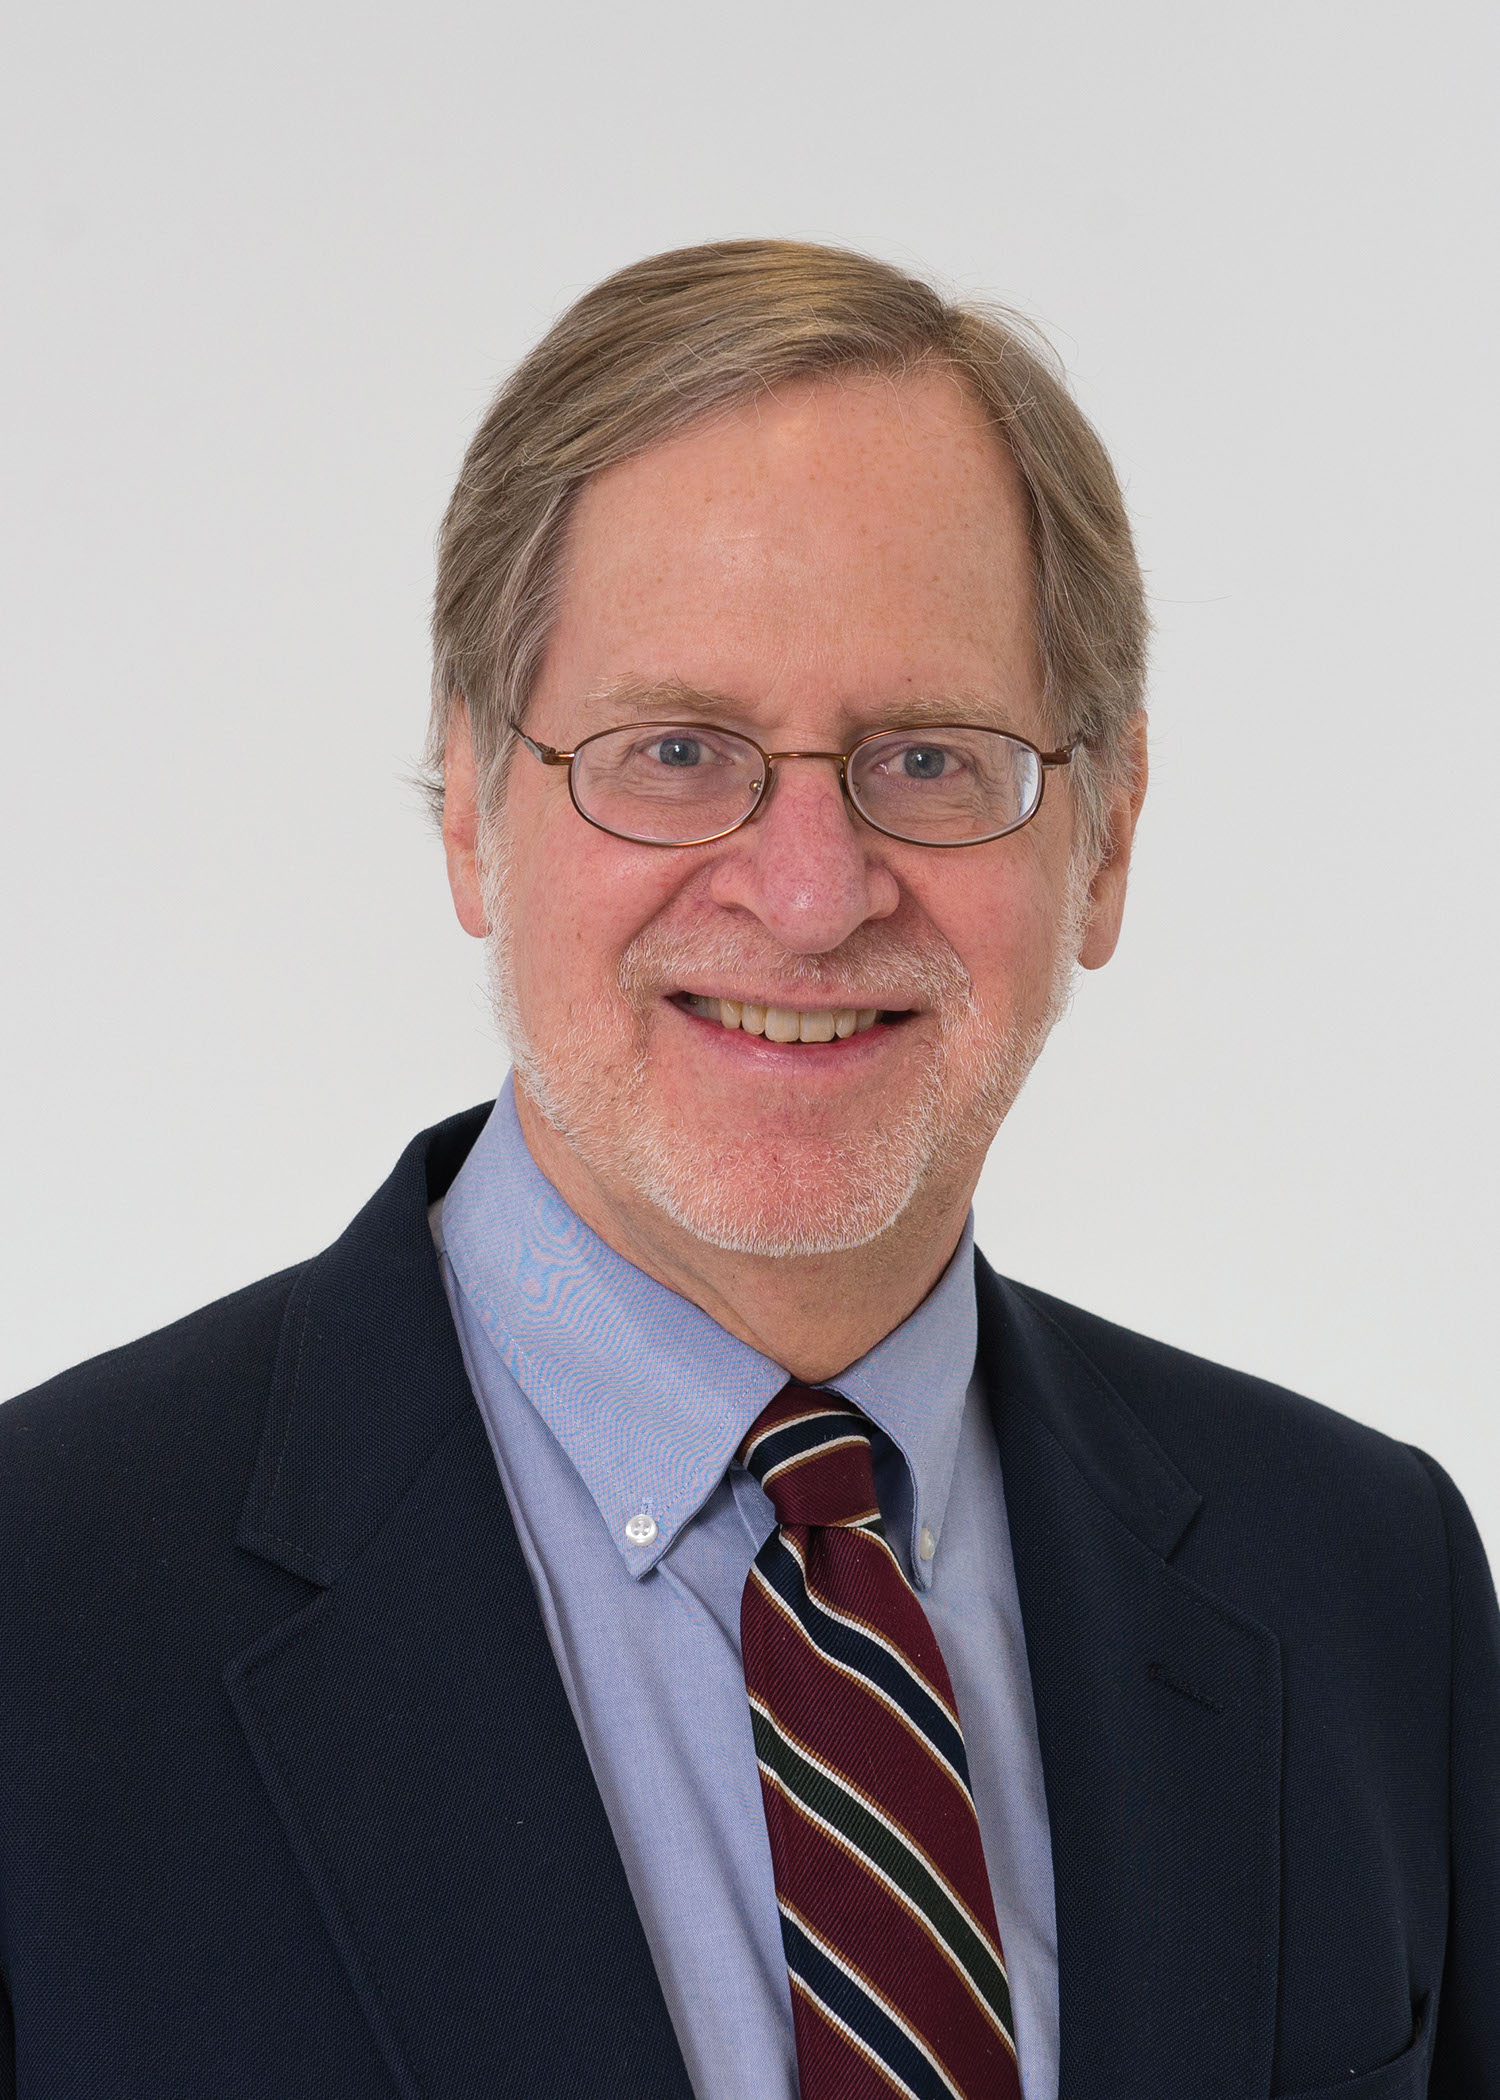 Douglas E. Peterson, DMD, PhD, FDS, RCSEd, is chair of the American Society of Clinical Oncology’s Clinical Practice Guidelines Committee.